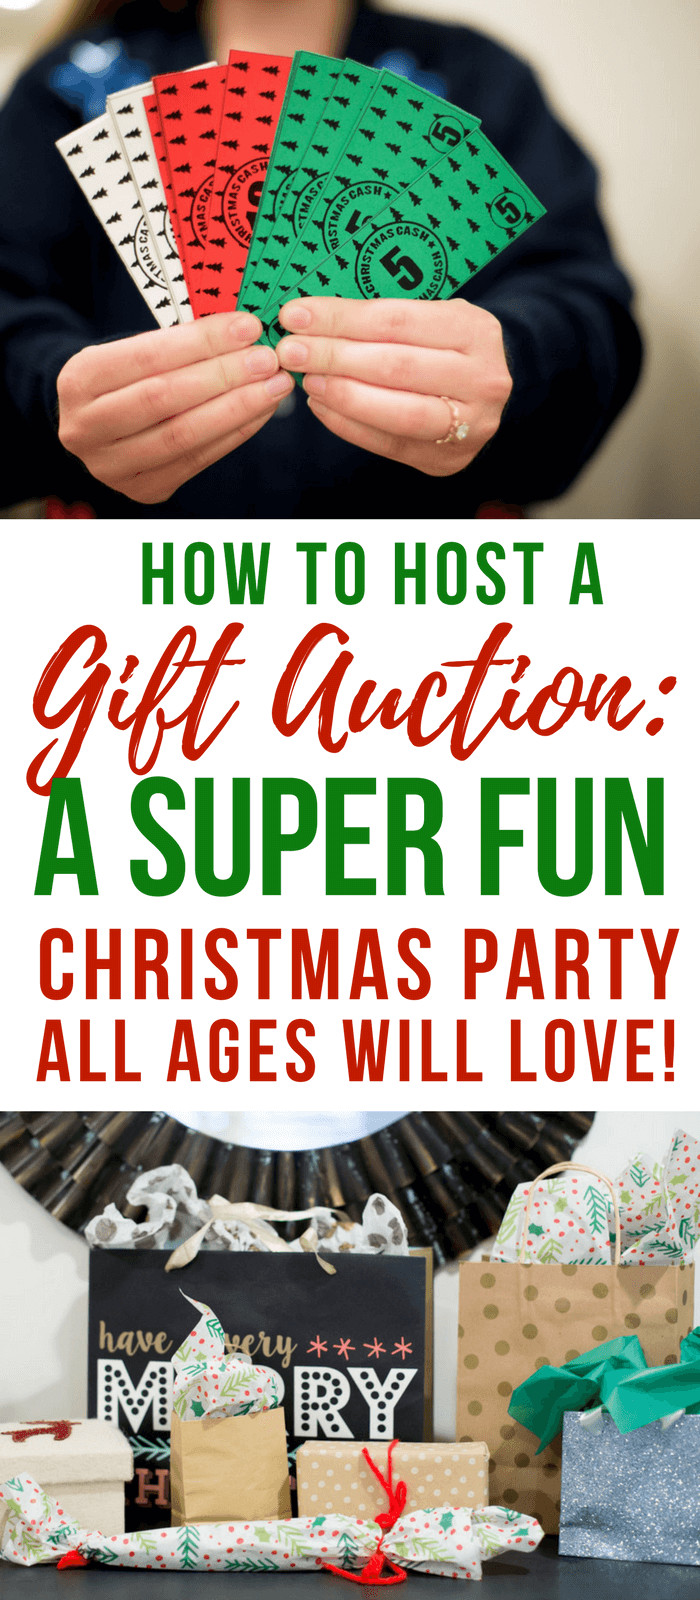 Funny Holiday Gift Exchange Ideas
 Hilarious White Elephant Gift Auction Christmas Party